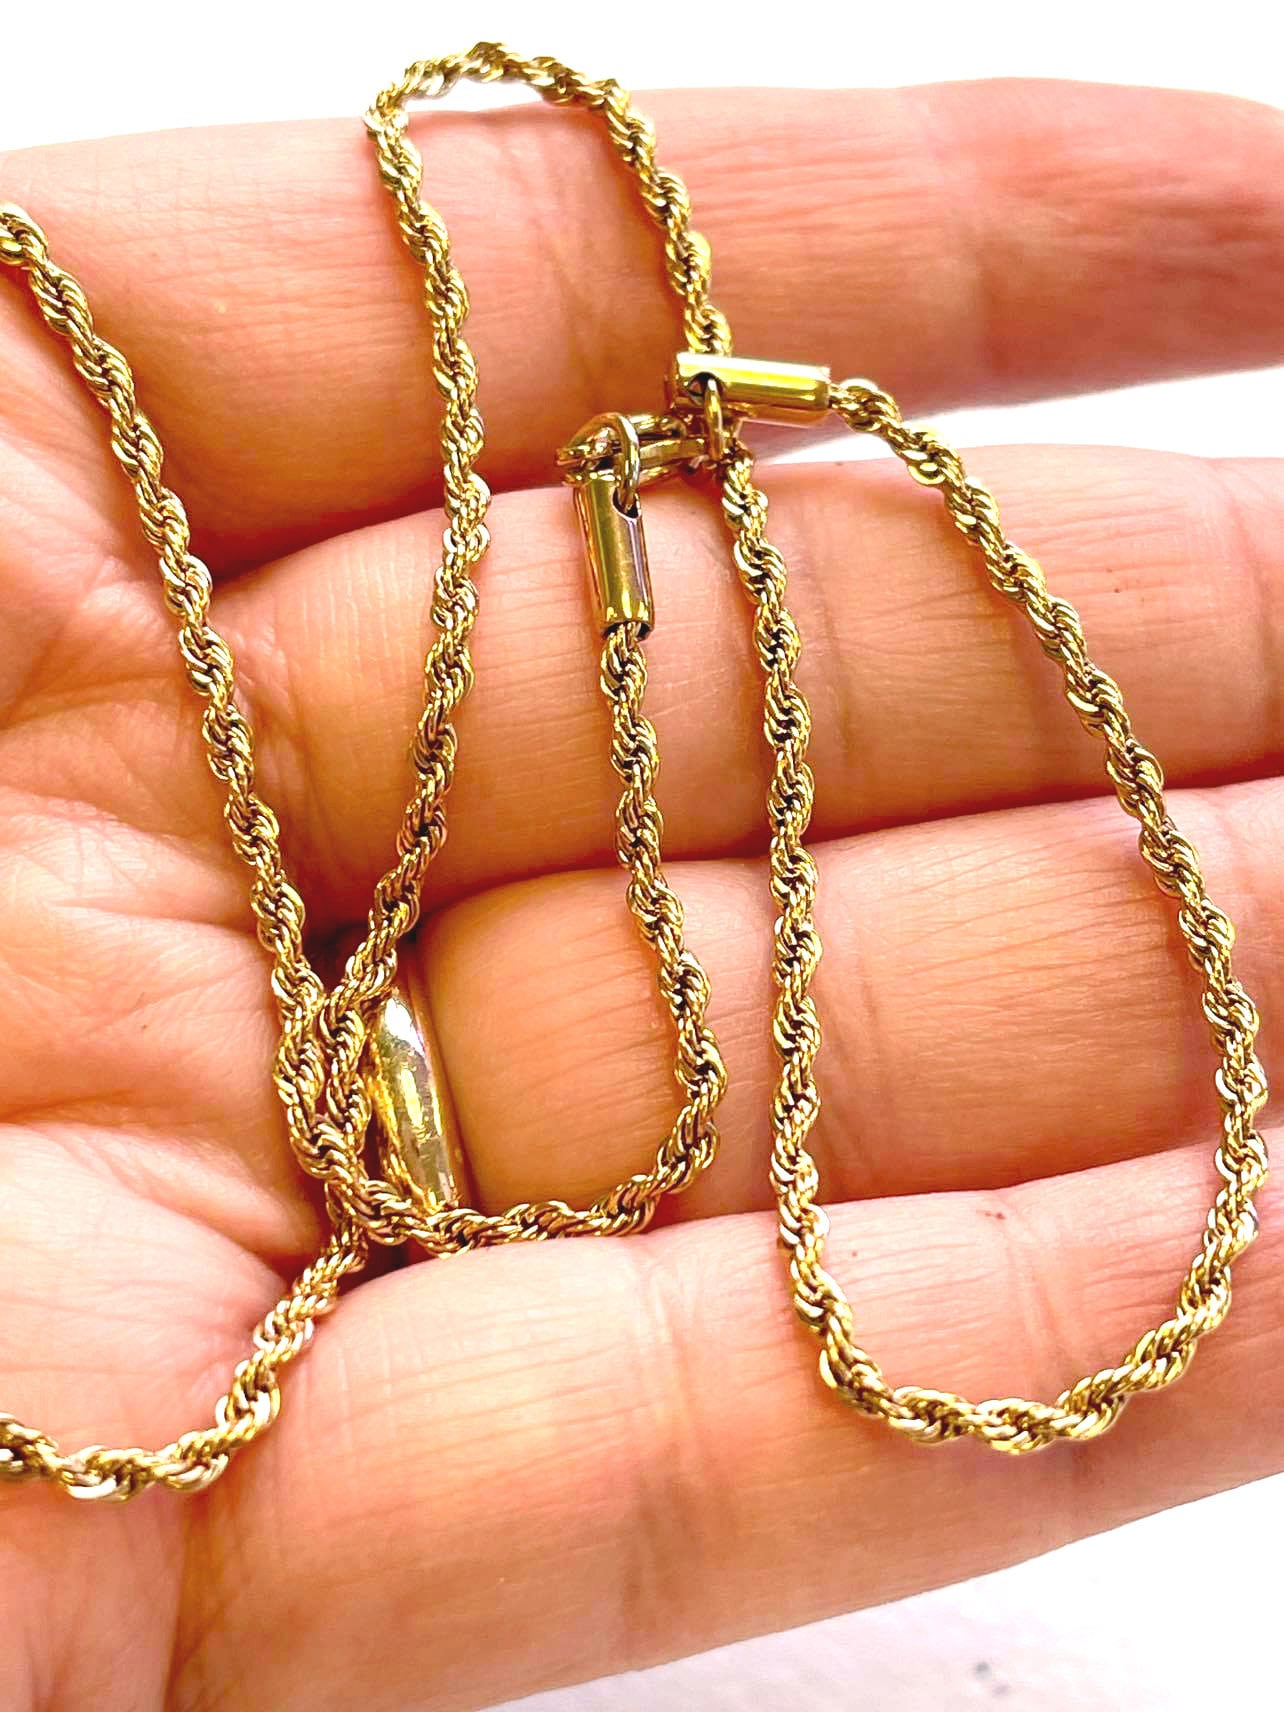 2 mm Gold Cord Twisted Chain -18" Long Gold Cord Chain - Wholesale - Bulk Chain Supply For Jewelry Making - DIY